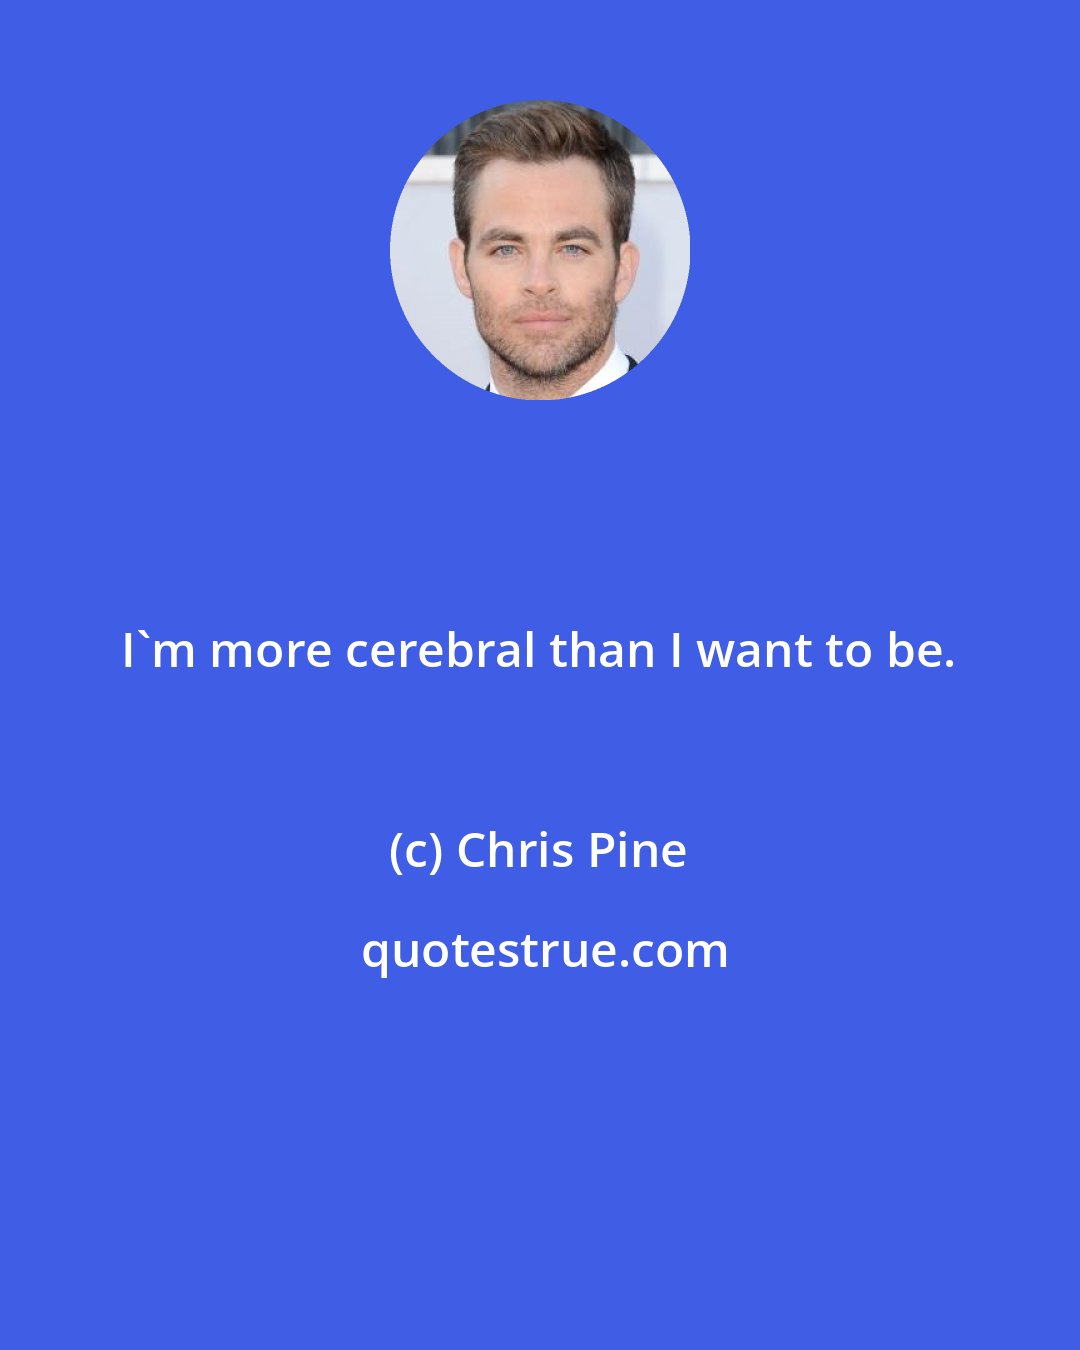 Chris Pine: I'm more cerebral than I want to be.